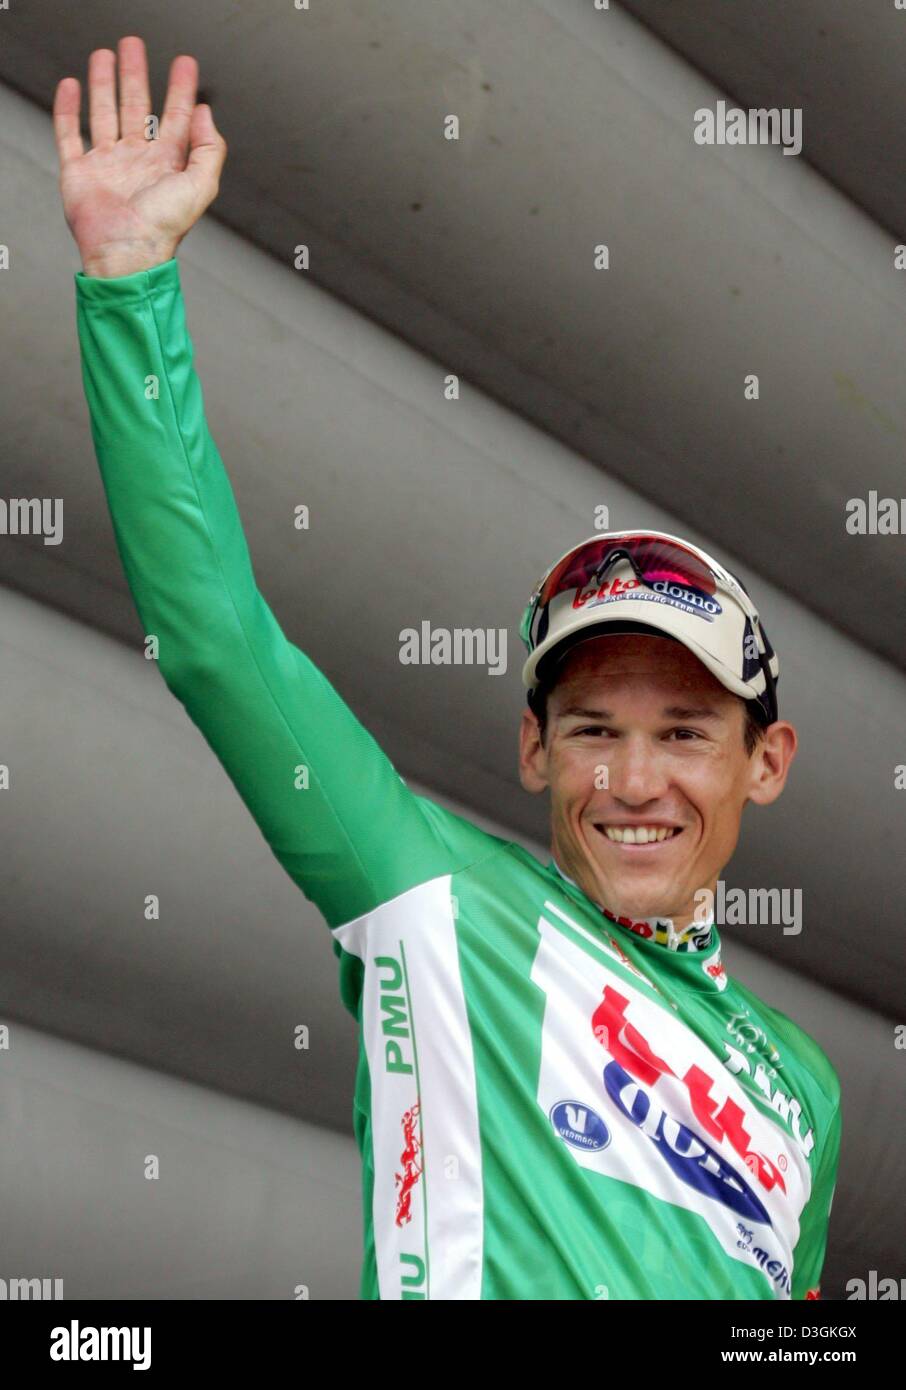 (dpa) - Australian cyclist Robbie McEwen of team Lotto-Domo celebrates after defending the green jersey of the best sprinter after the 14th stage of the Tour de France cycling race in Nimes, France, 18 July 2004. The 192.5 km long stage led from Carcassonne to Nimes. Stock Photo